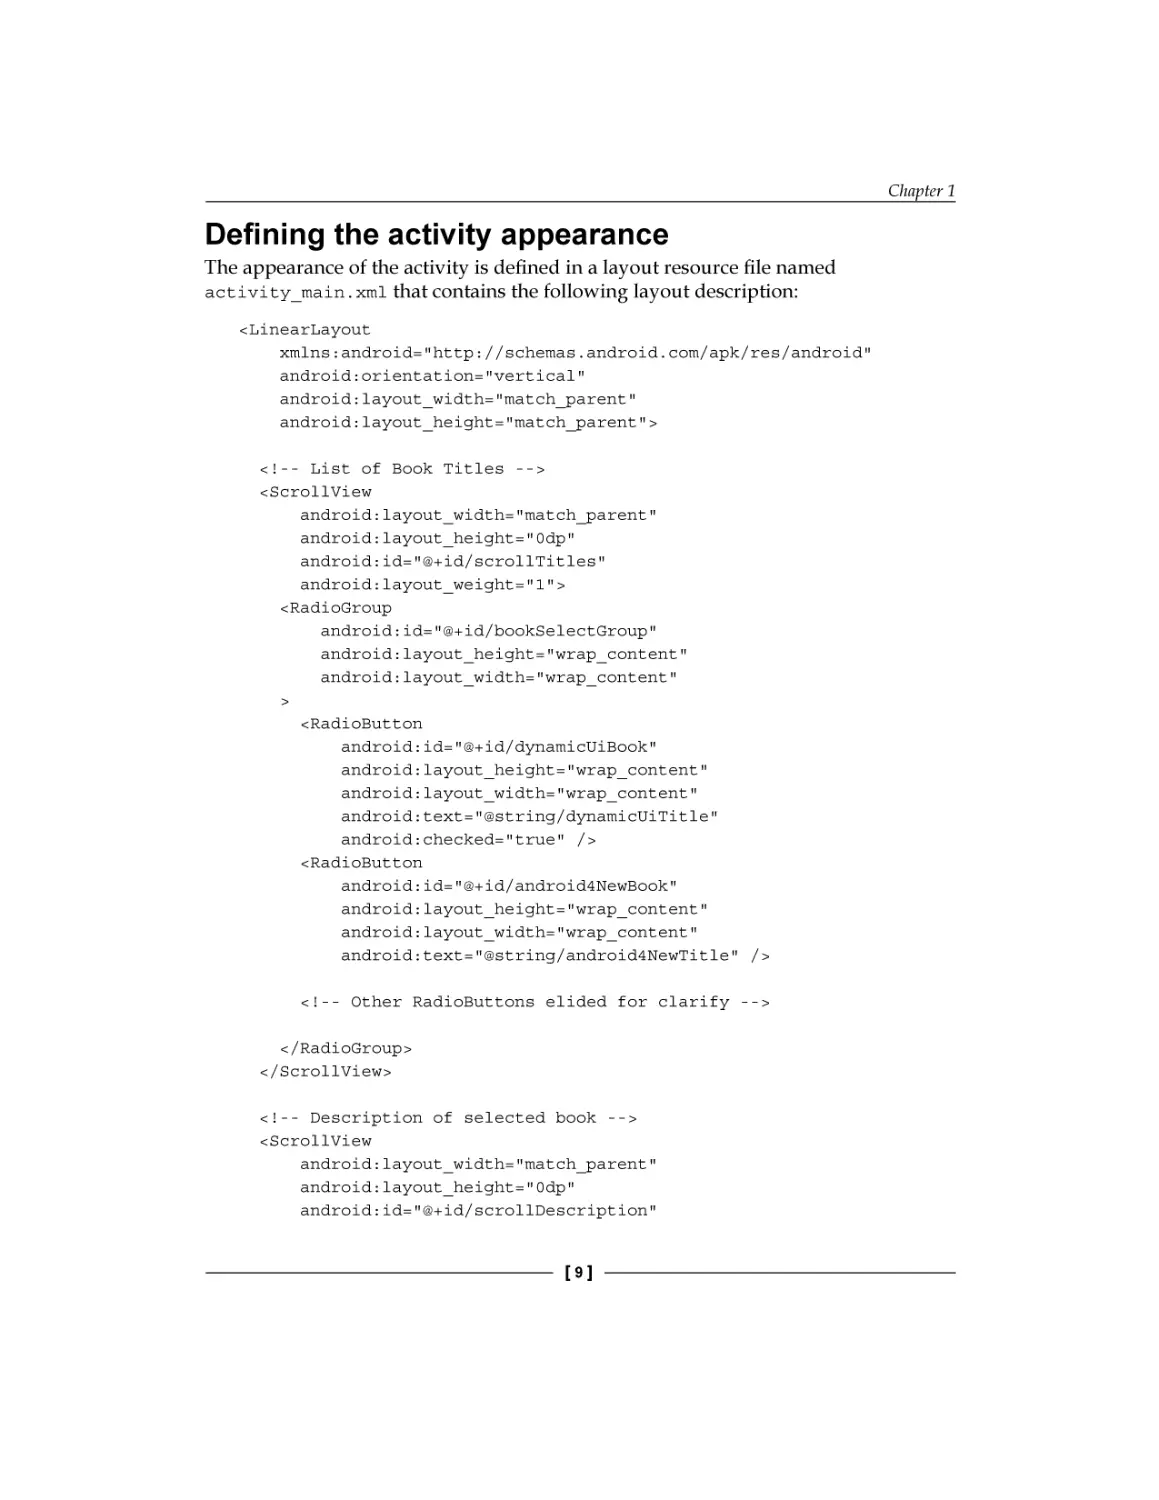 Defining the activity appearance